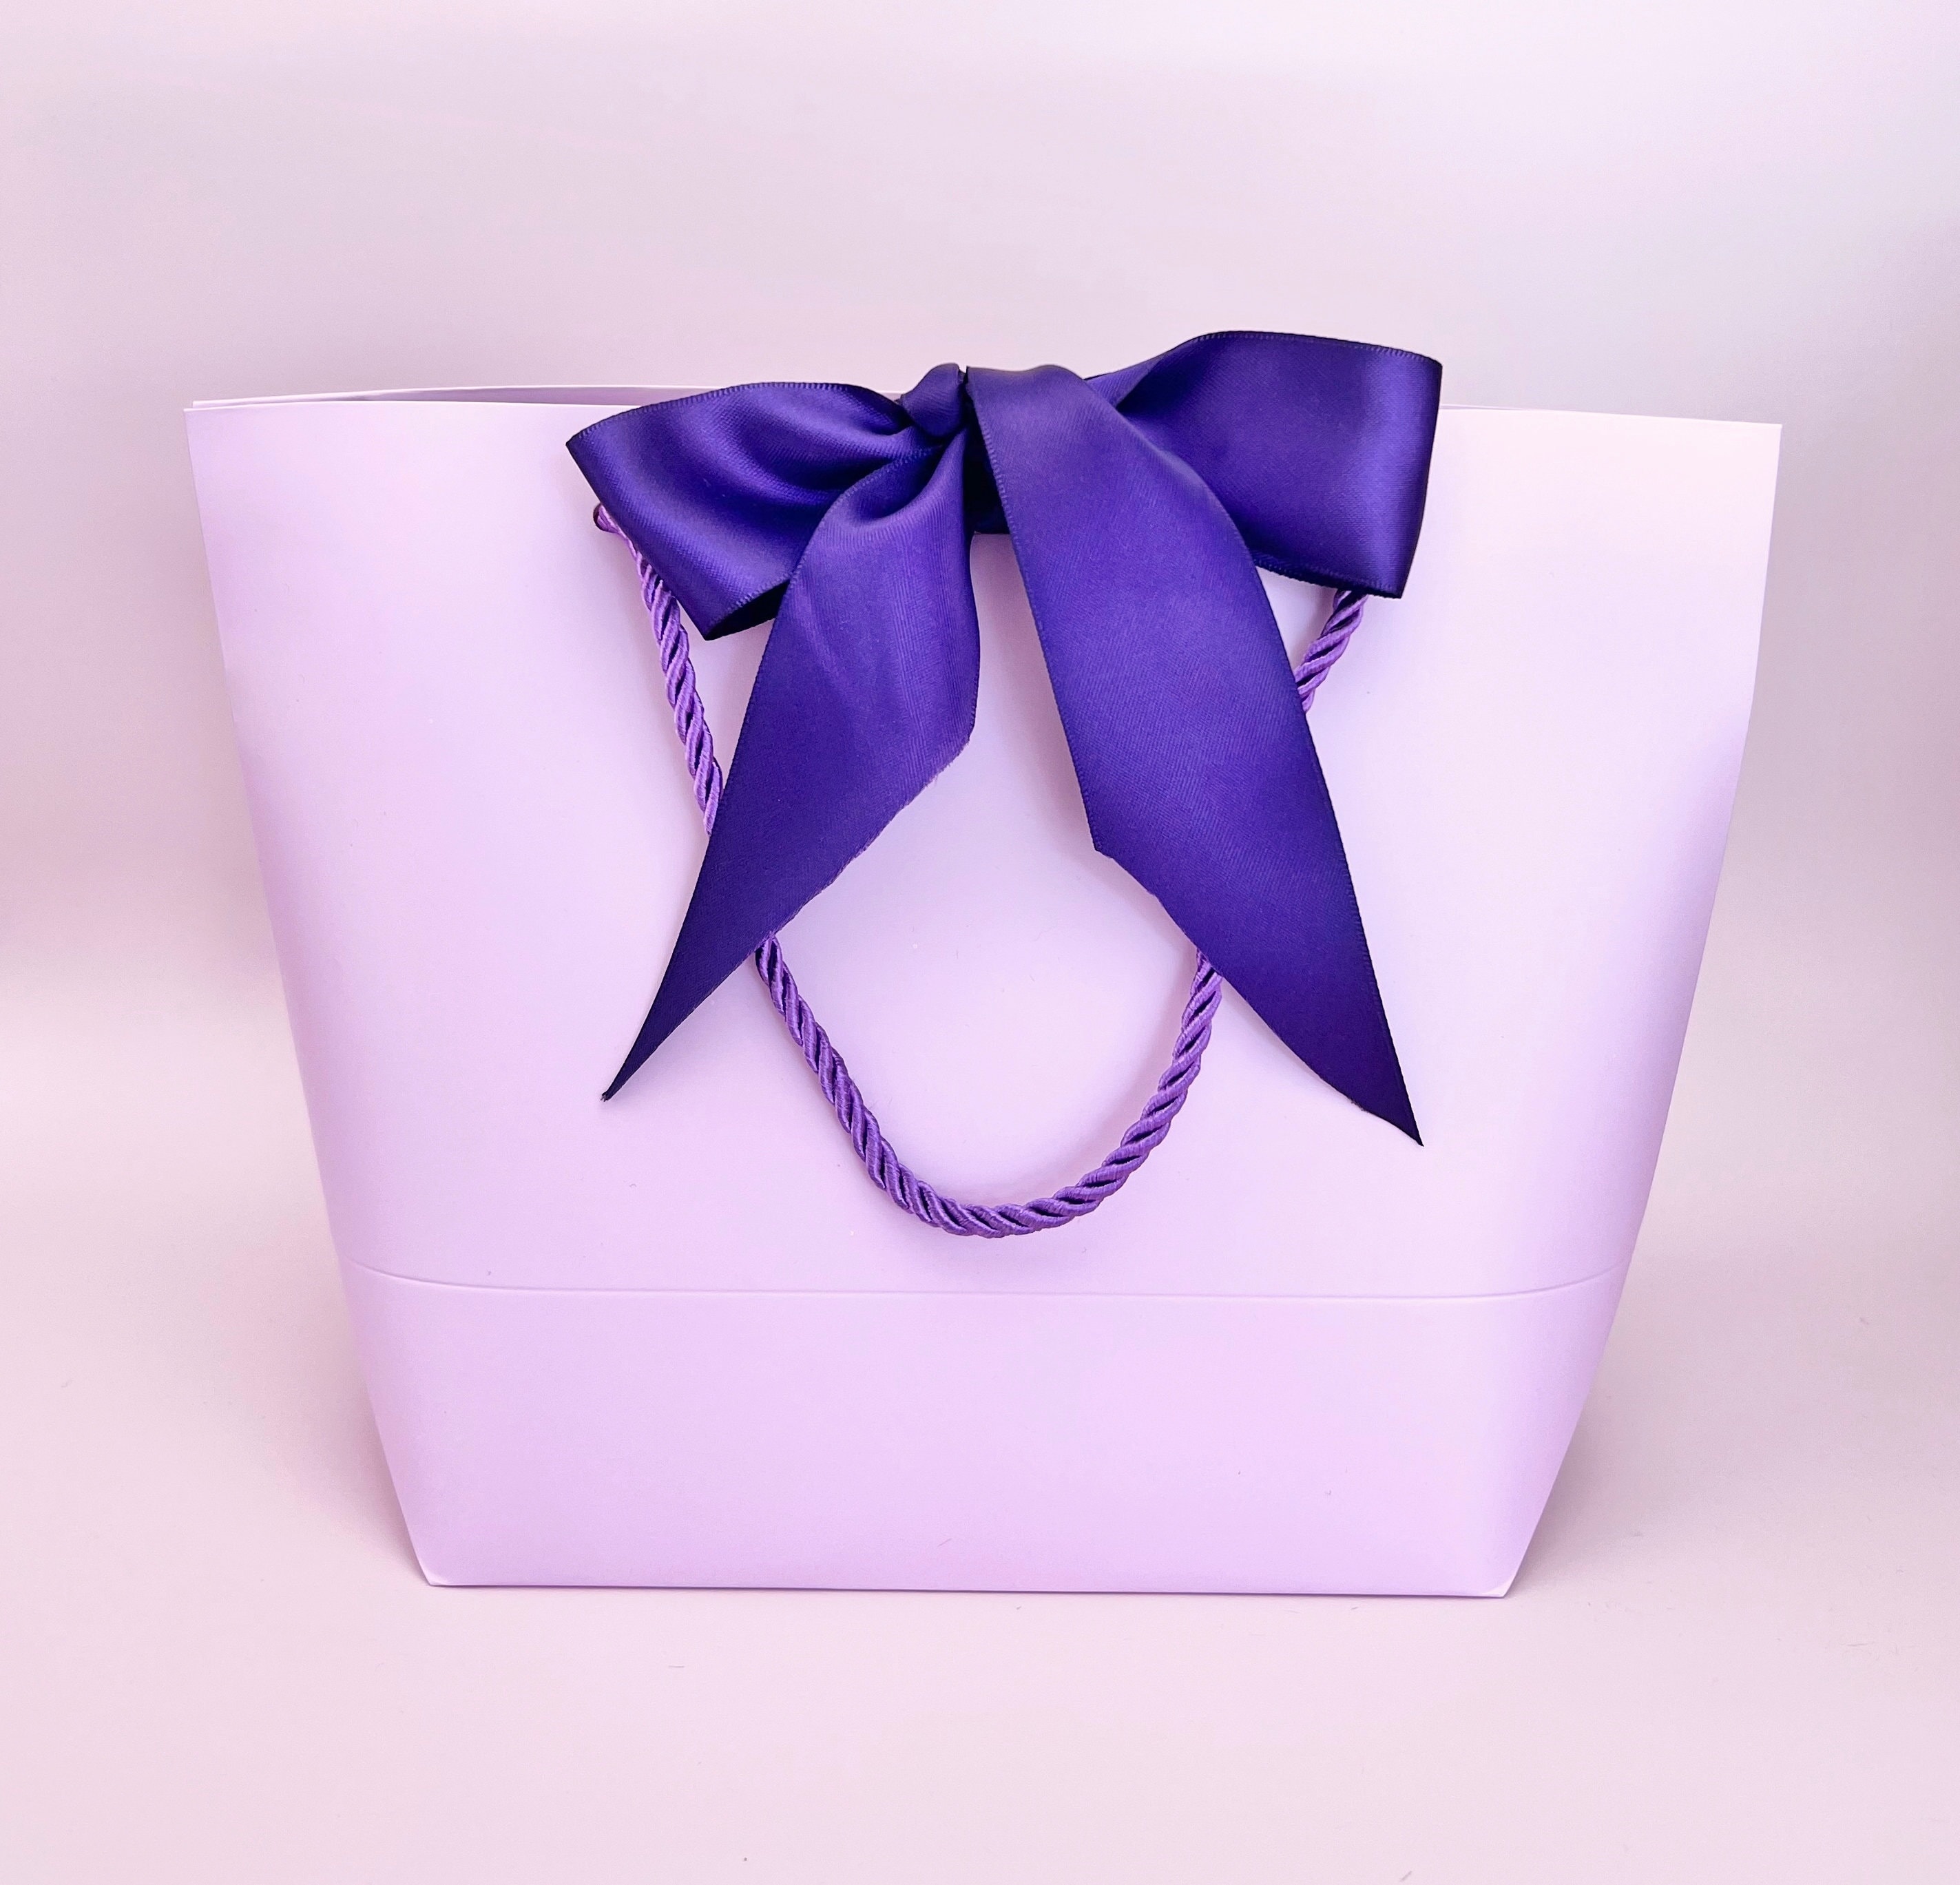 Elegant Light Purple Gift Bag With Wide 1.5 Inch Purple Ribbon and Cords  10-1/2 X 7-1/2 X 3-1/2 Inch for Gift Gifting, Birthday 